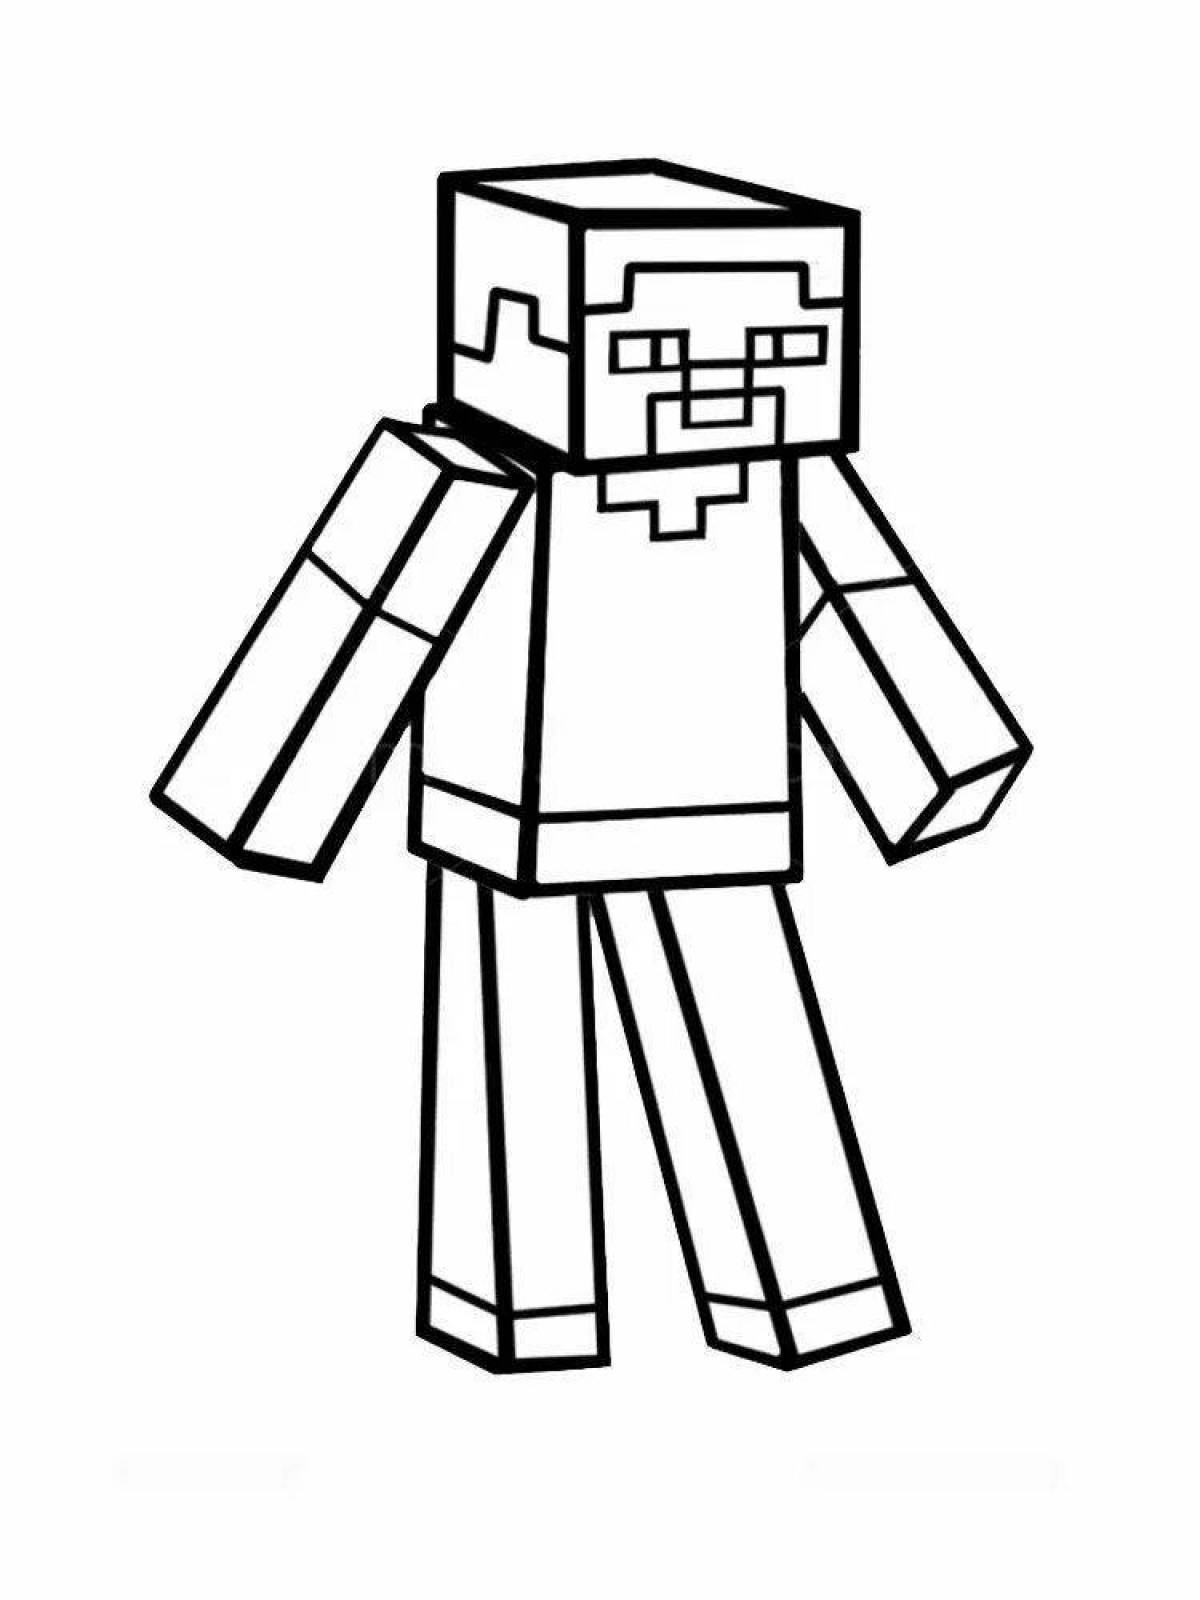 Coloring creative minecraft characters